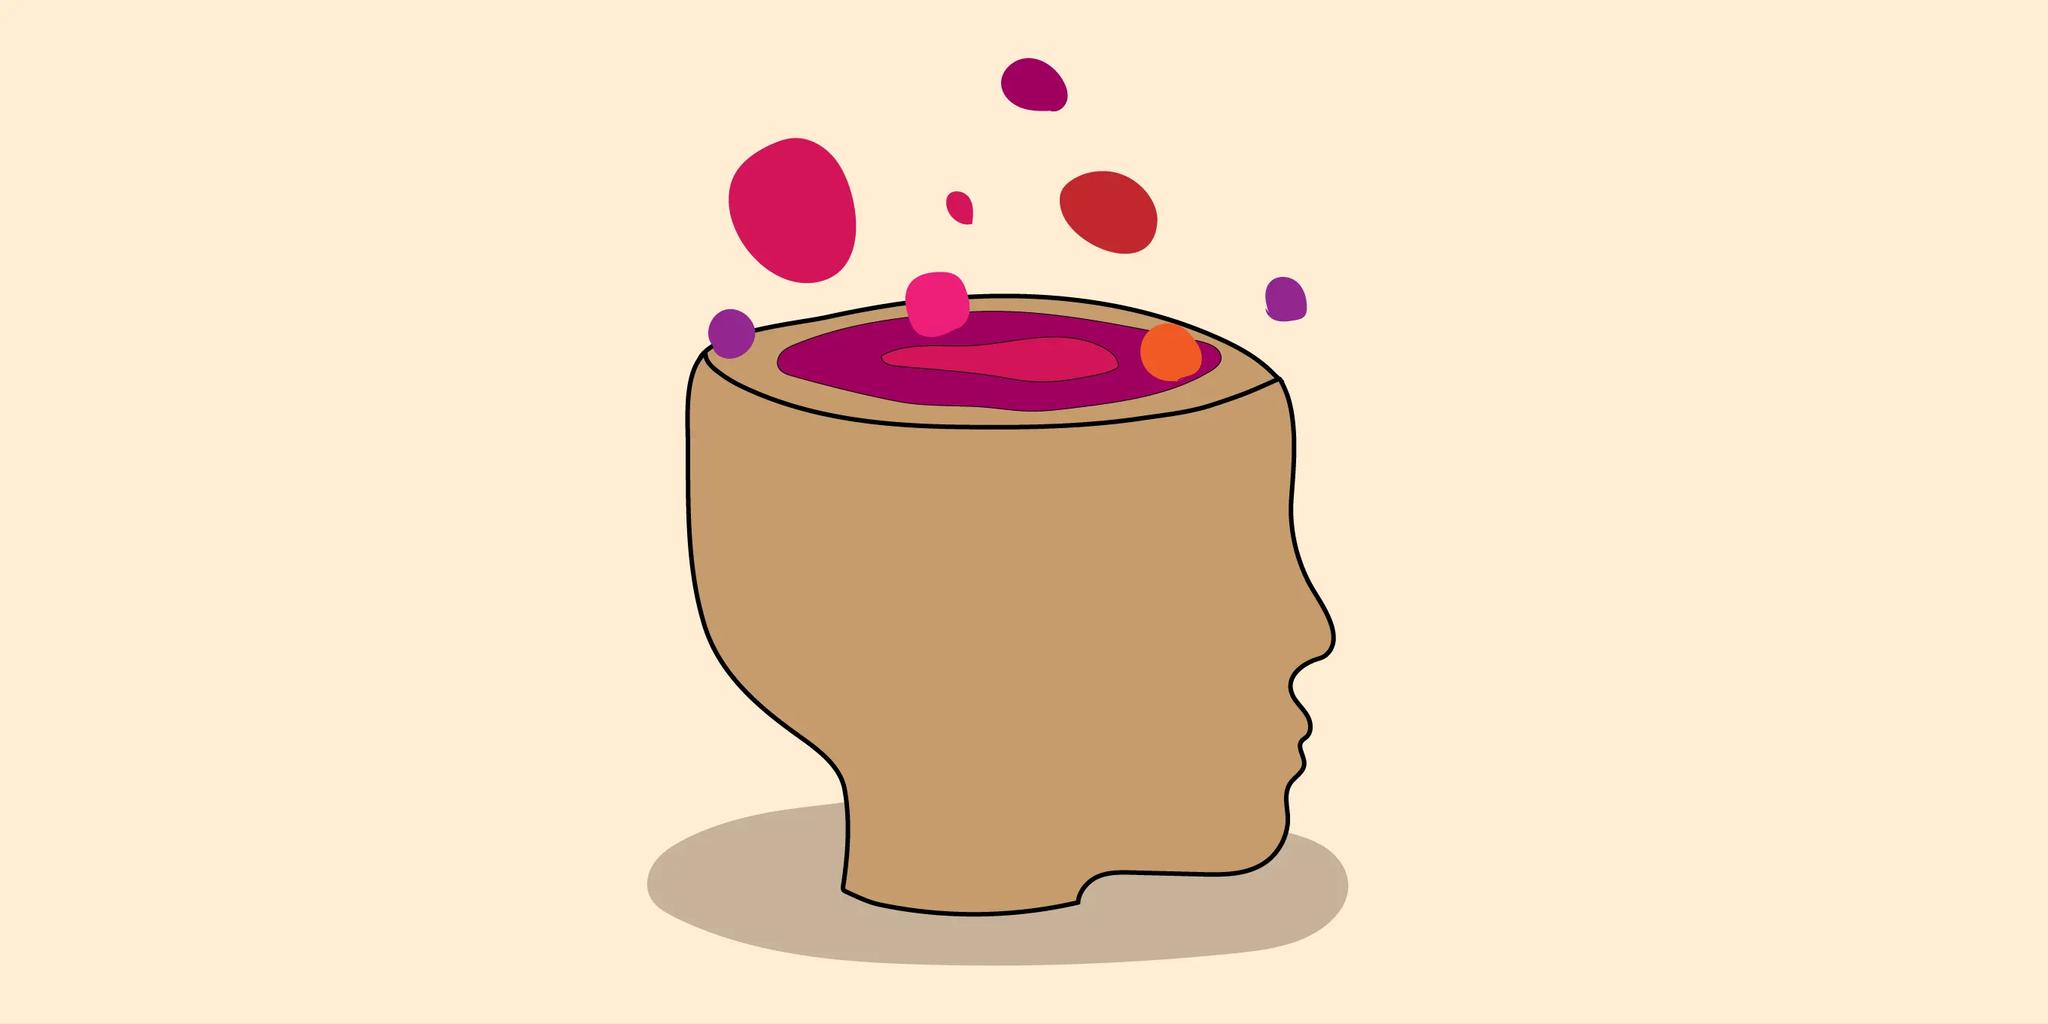 Animated illustration of a human head with red circles popping out of the top demonstrating ideas or thoughts spilling from a persons head